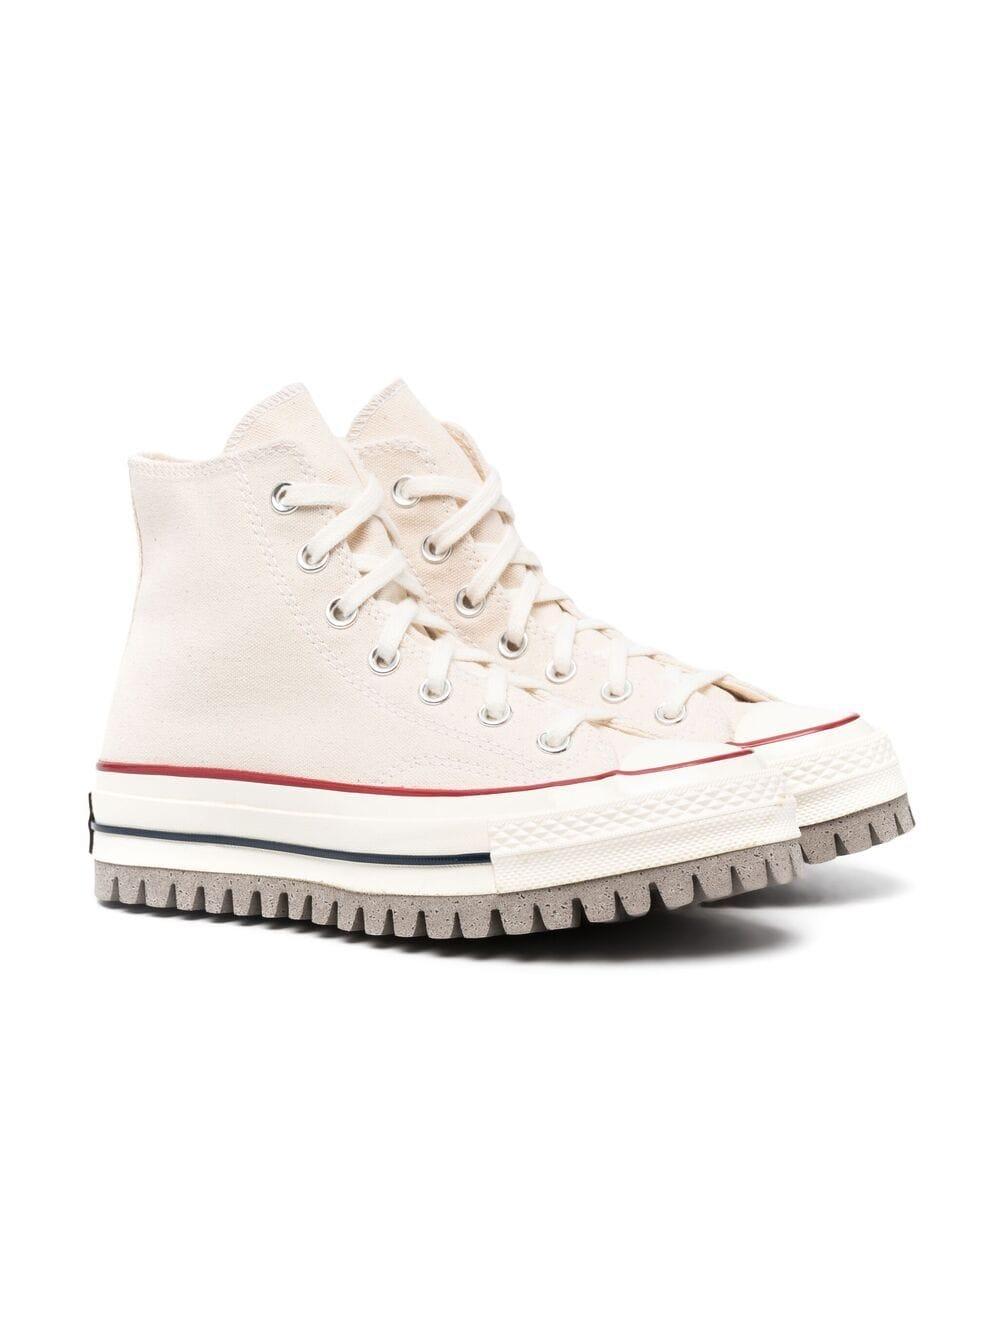 Converse Rubber Sneakers White - Save 46% | Lyst